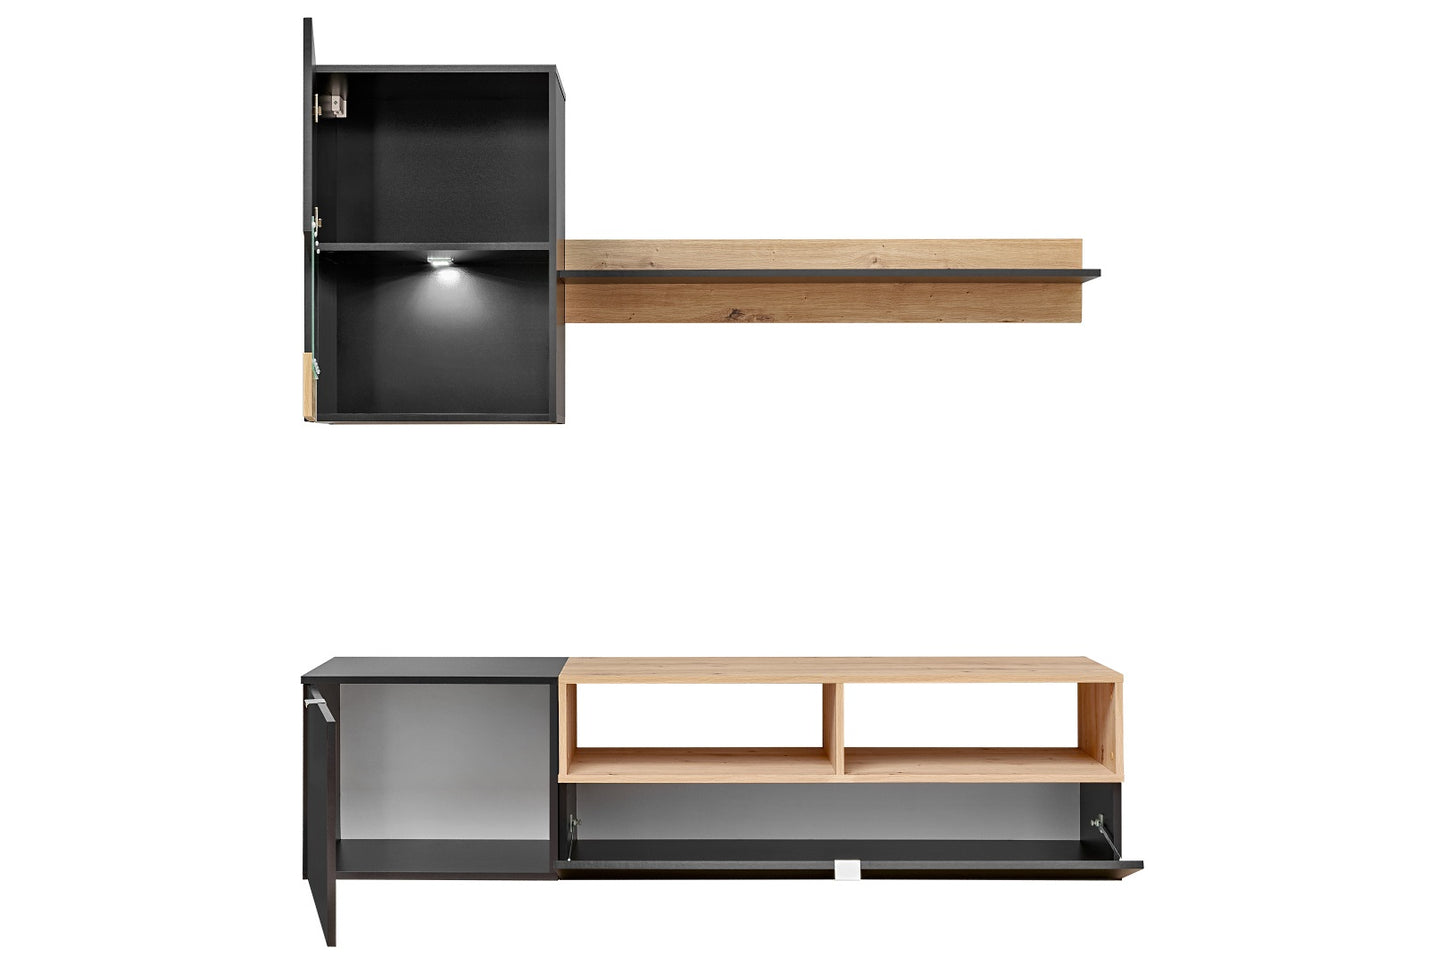 MINI - Wall Unit Modern Design Suitable for Small Rooms, with White LED Light >175 cm x 195 cm< FAST DELIVERY